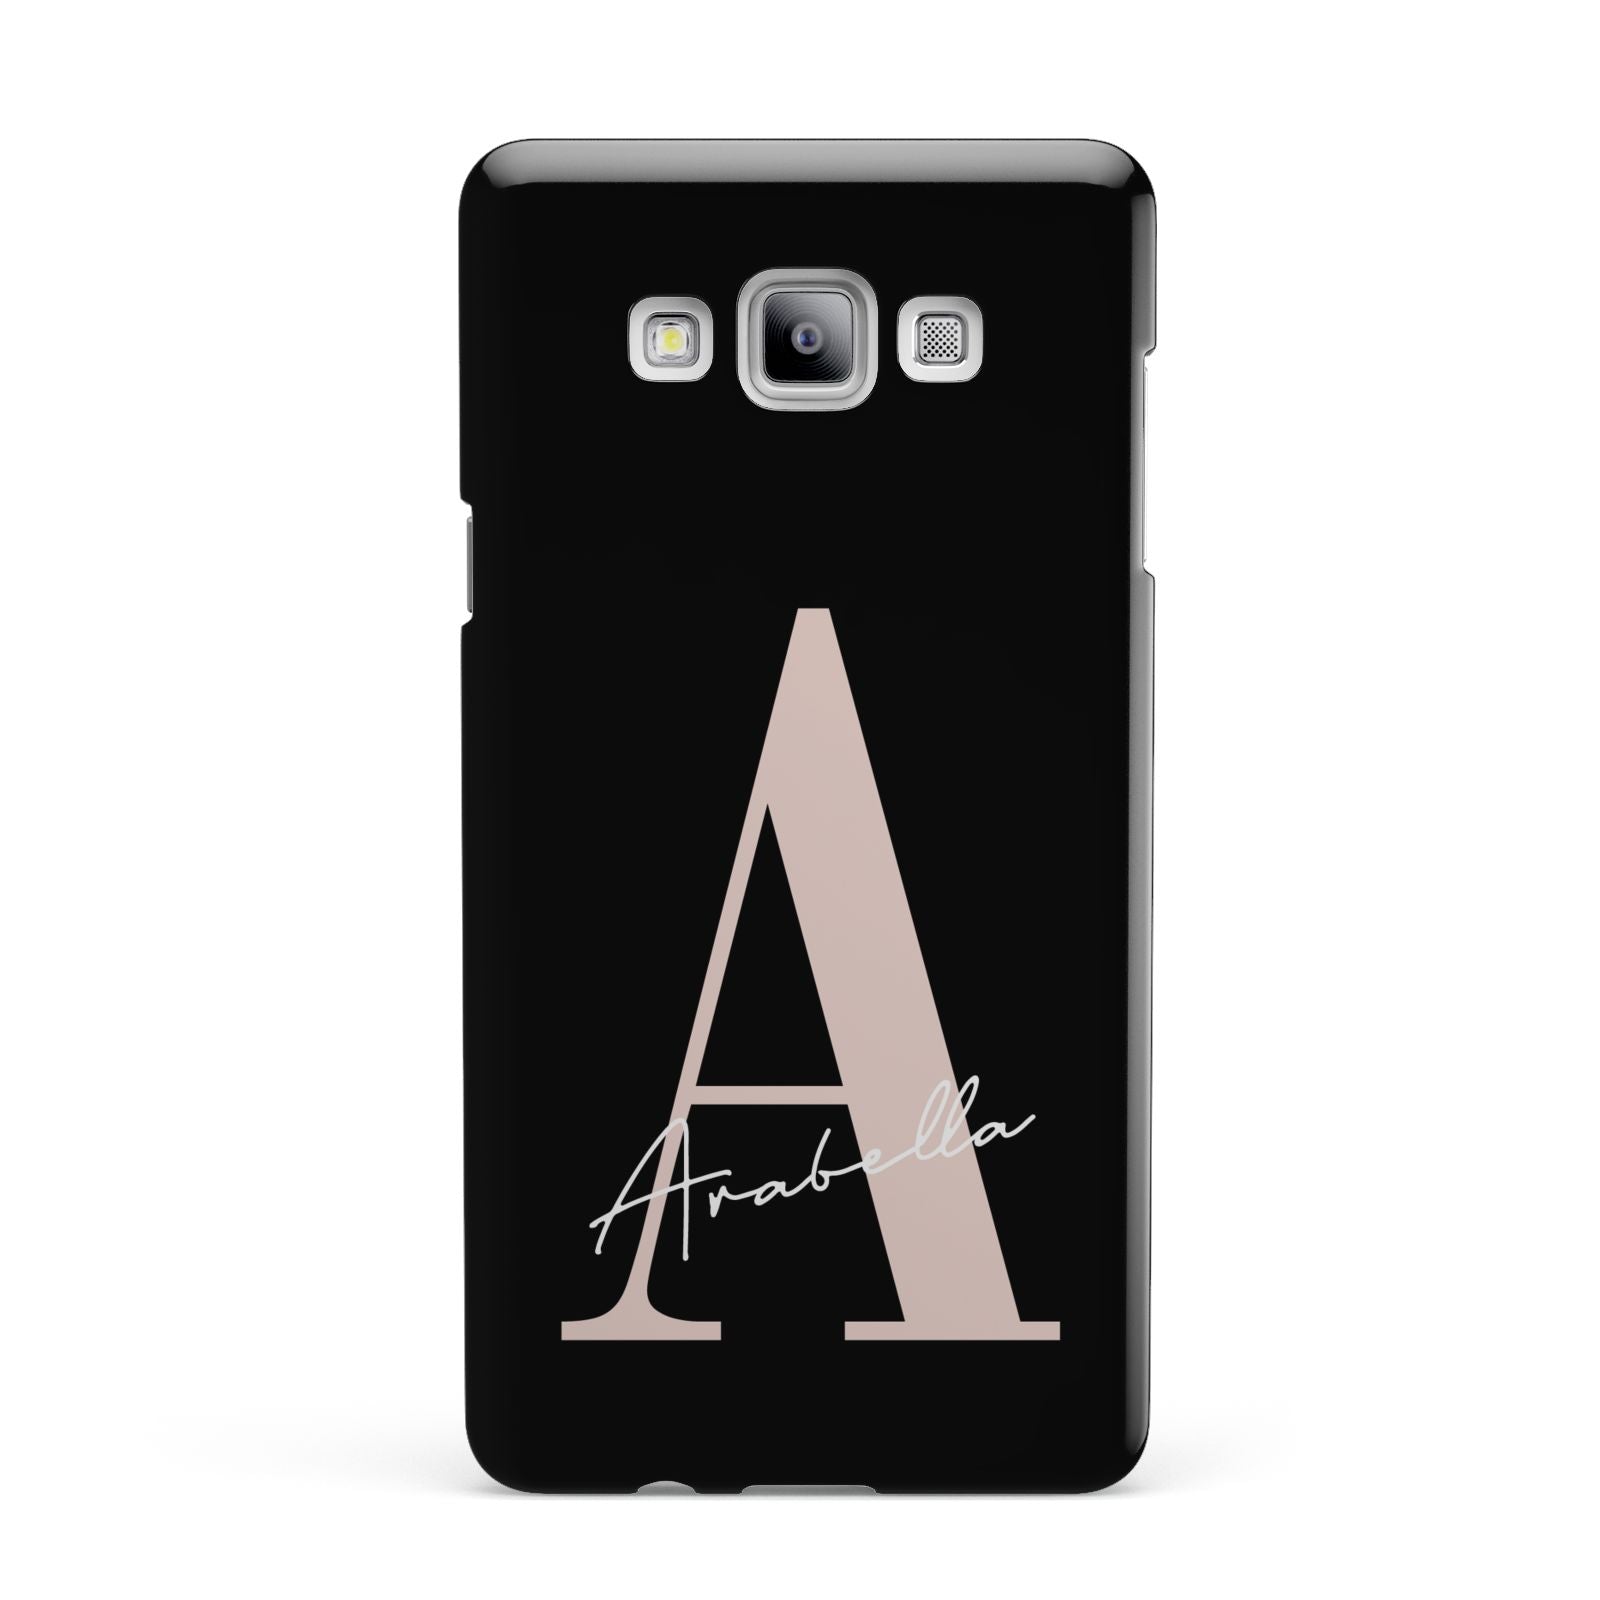 Personalised Black Pink Initial Samsung Galaxy A7 2015 Case